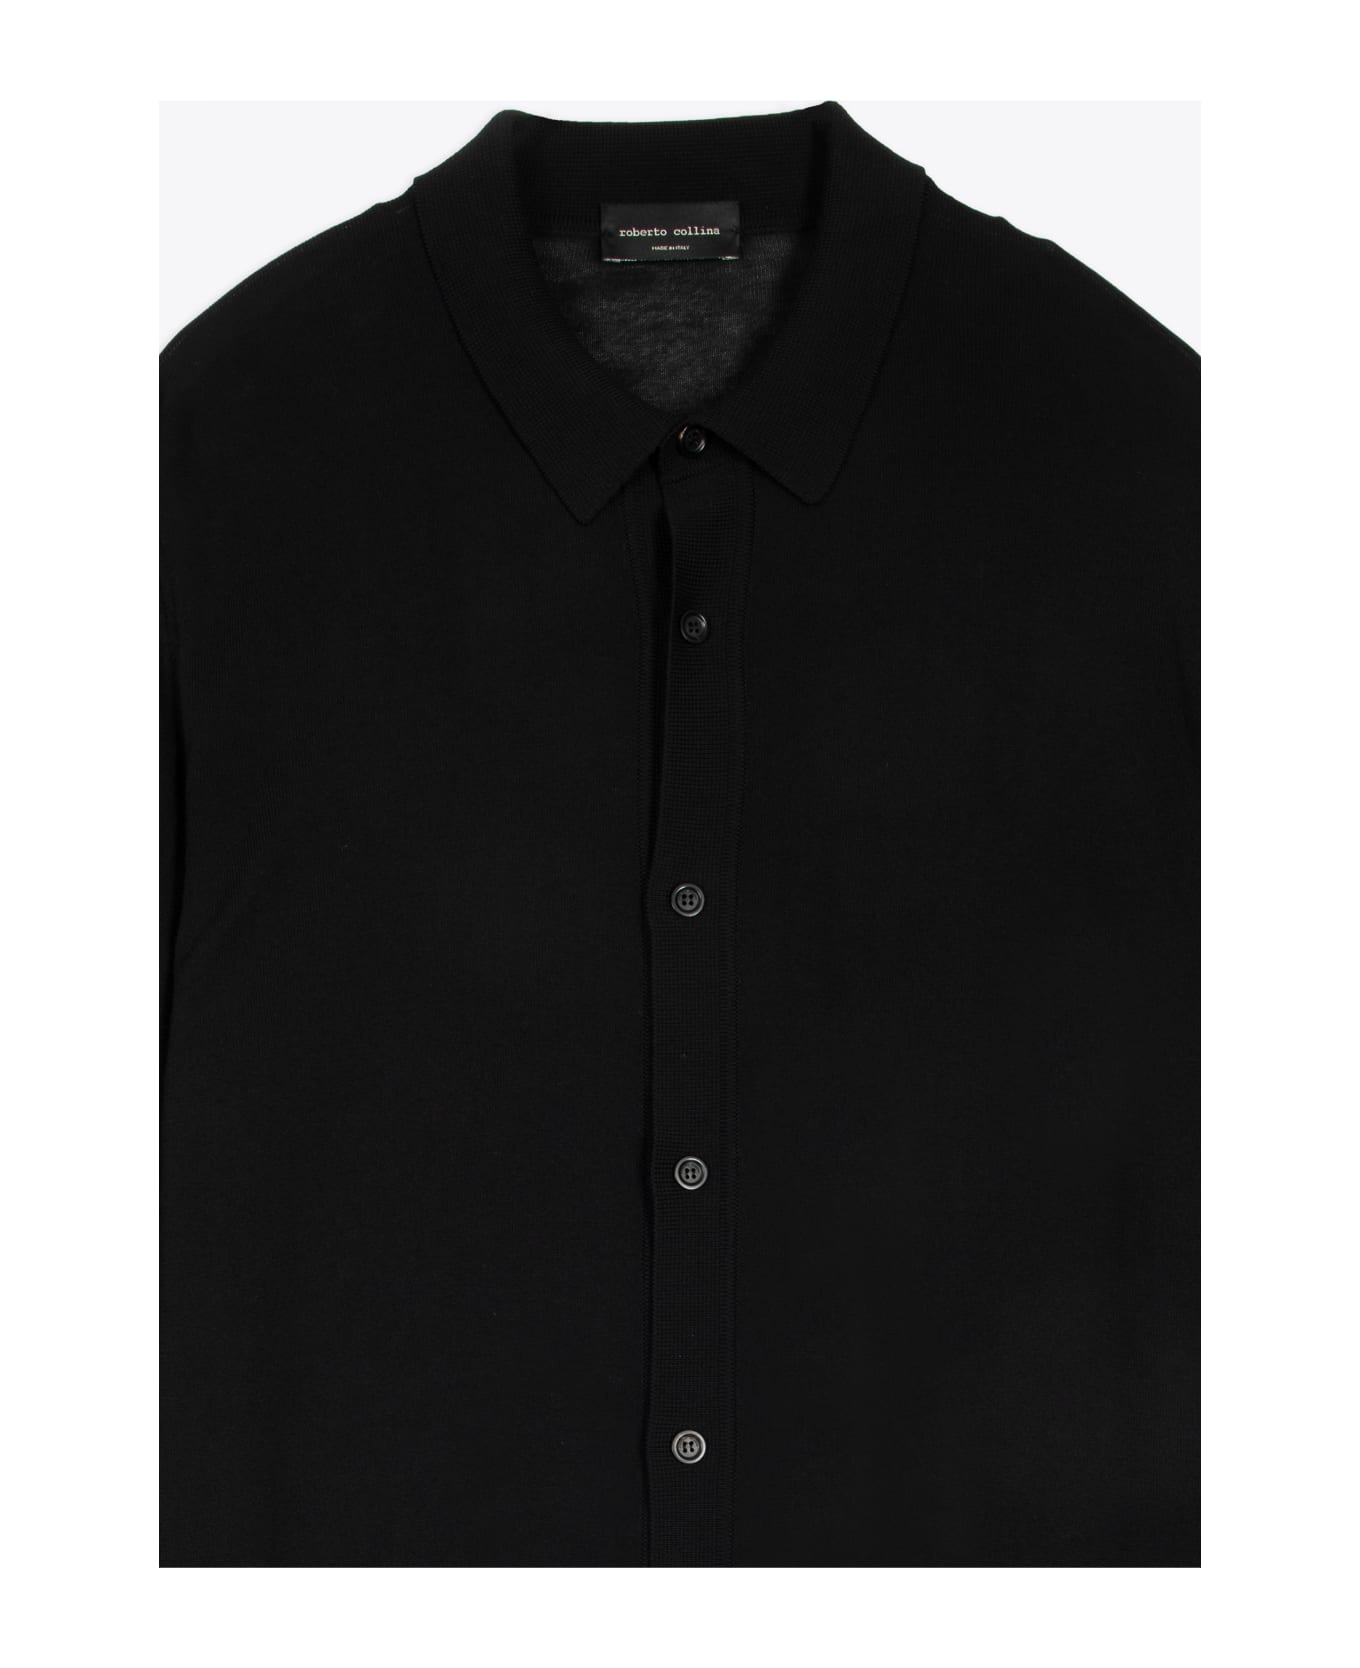 Roberto Collina Camicia Ml Black cotton knit shirt with long sleeves - Nero シャツ